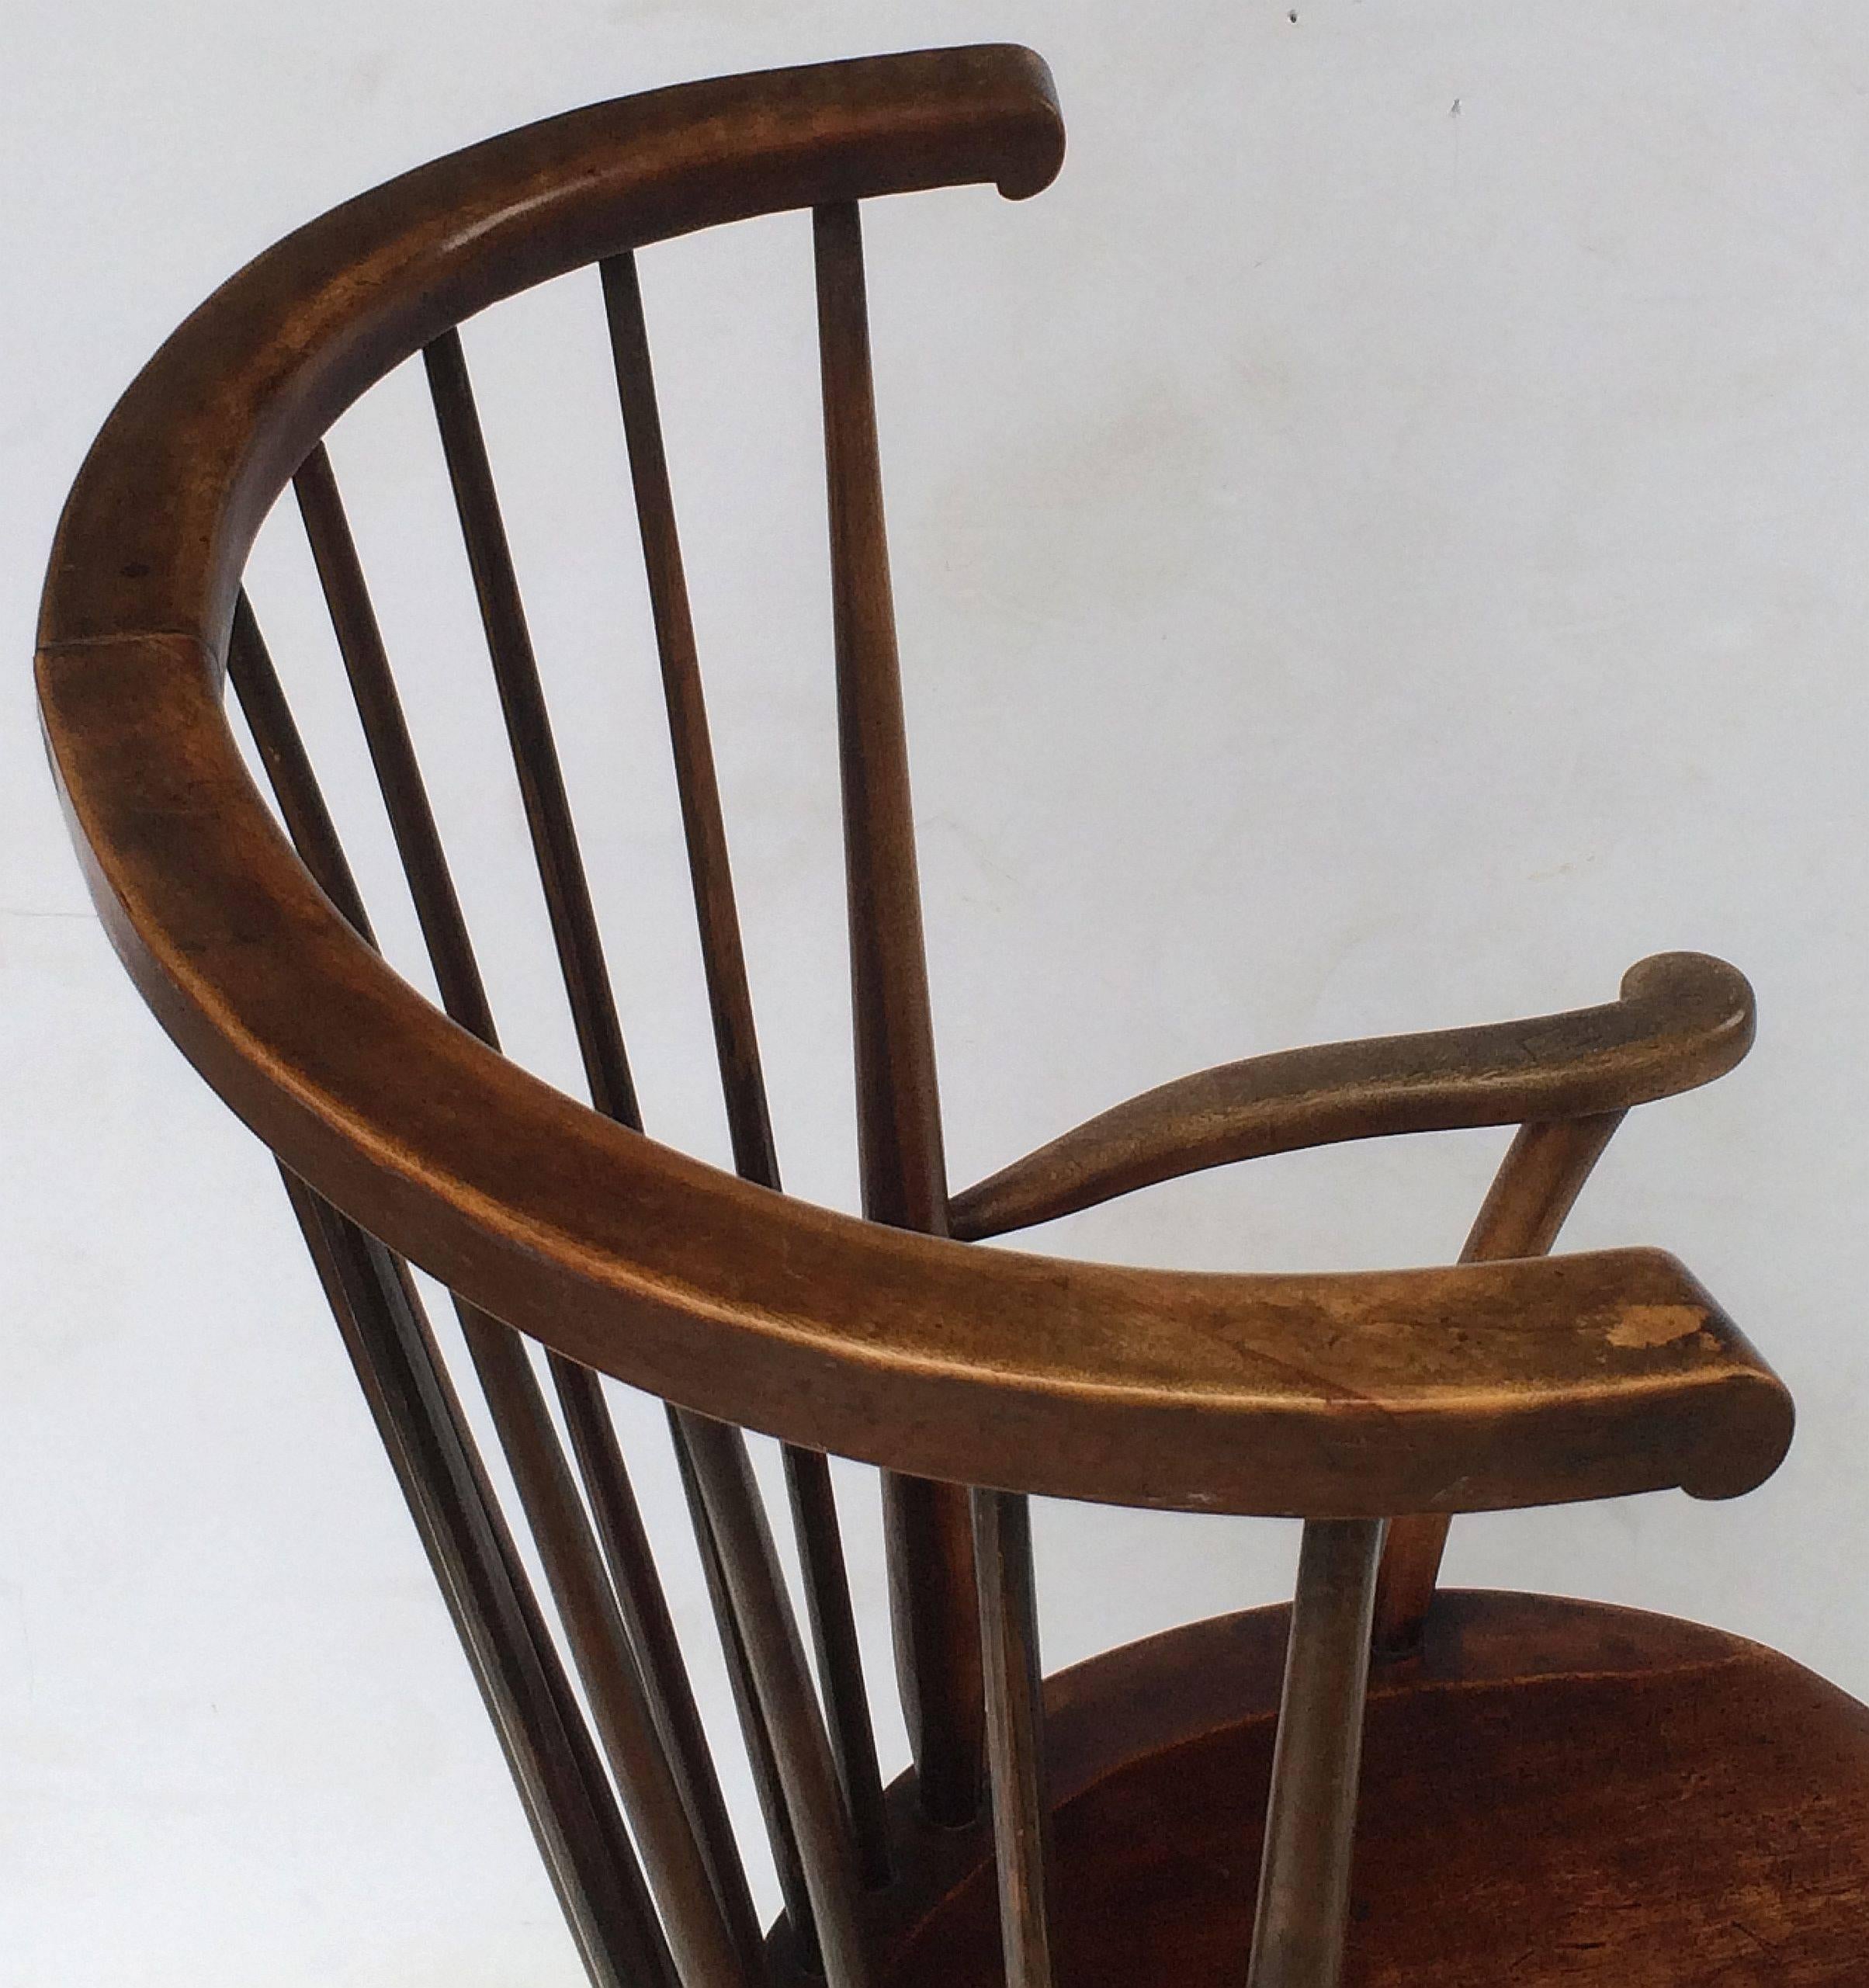 Wood Arts and Crafts Era Windsor Chair